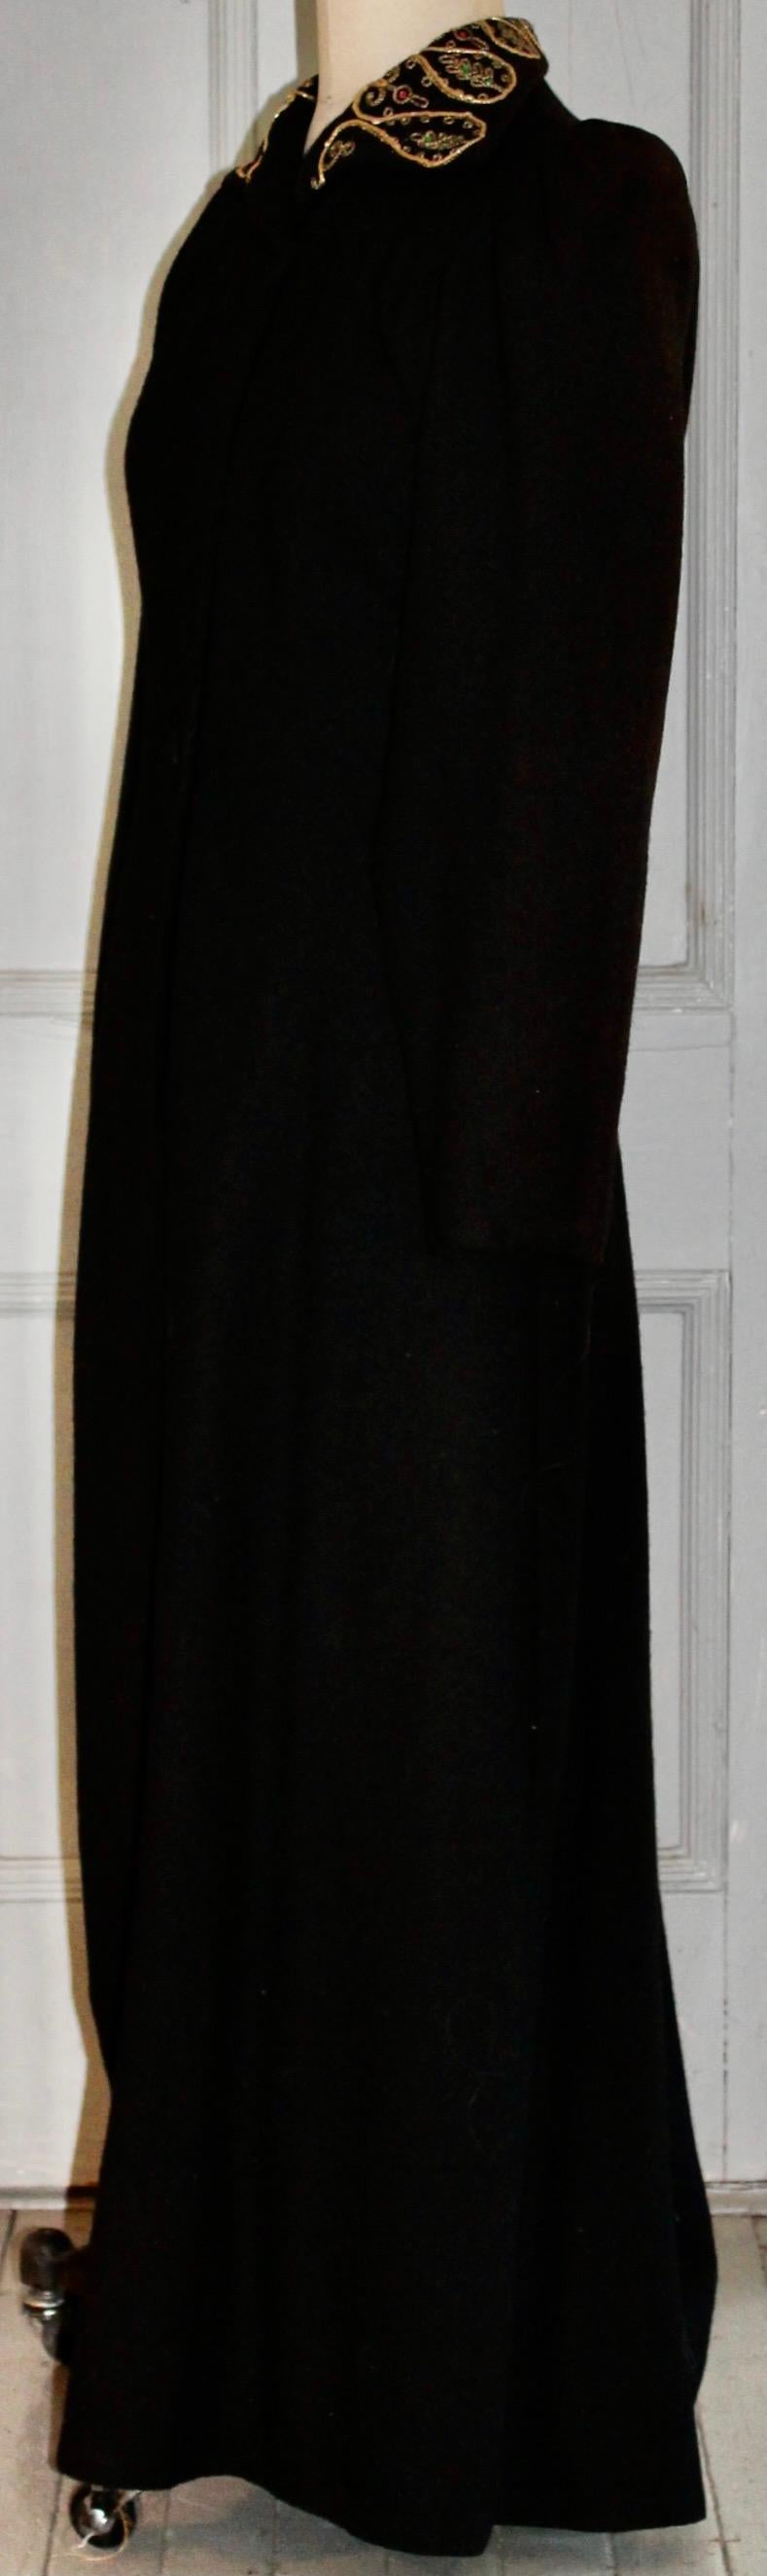 Edwardian Black Wool Coat with Faux Jewels For Sale 4